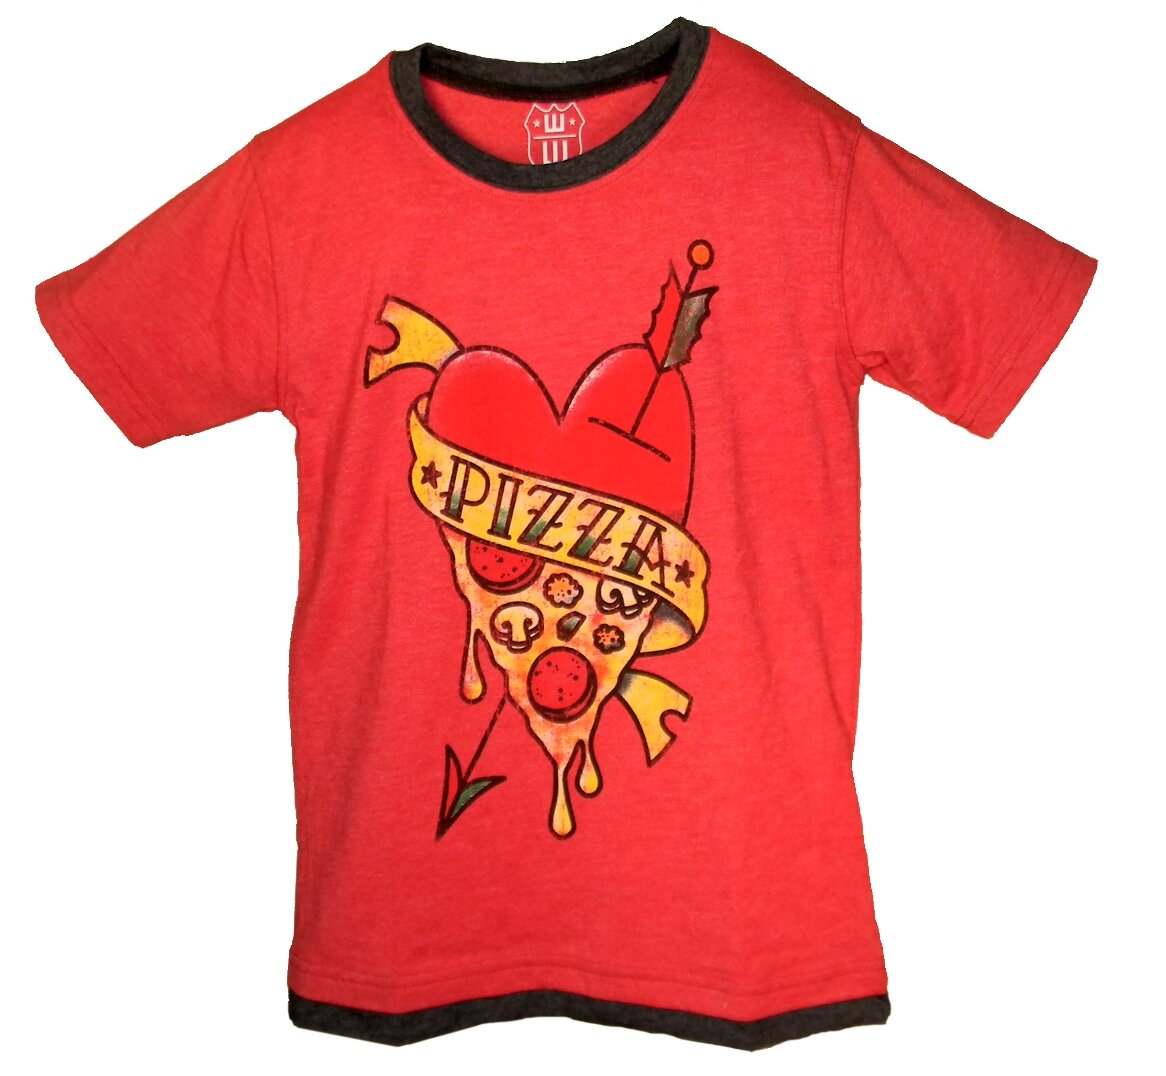 Boys' Pizza Shirt by Wes and Willy (Size: 4)